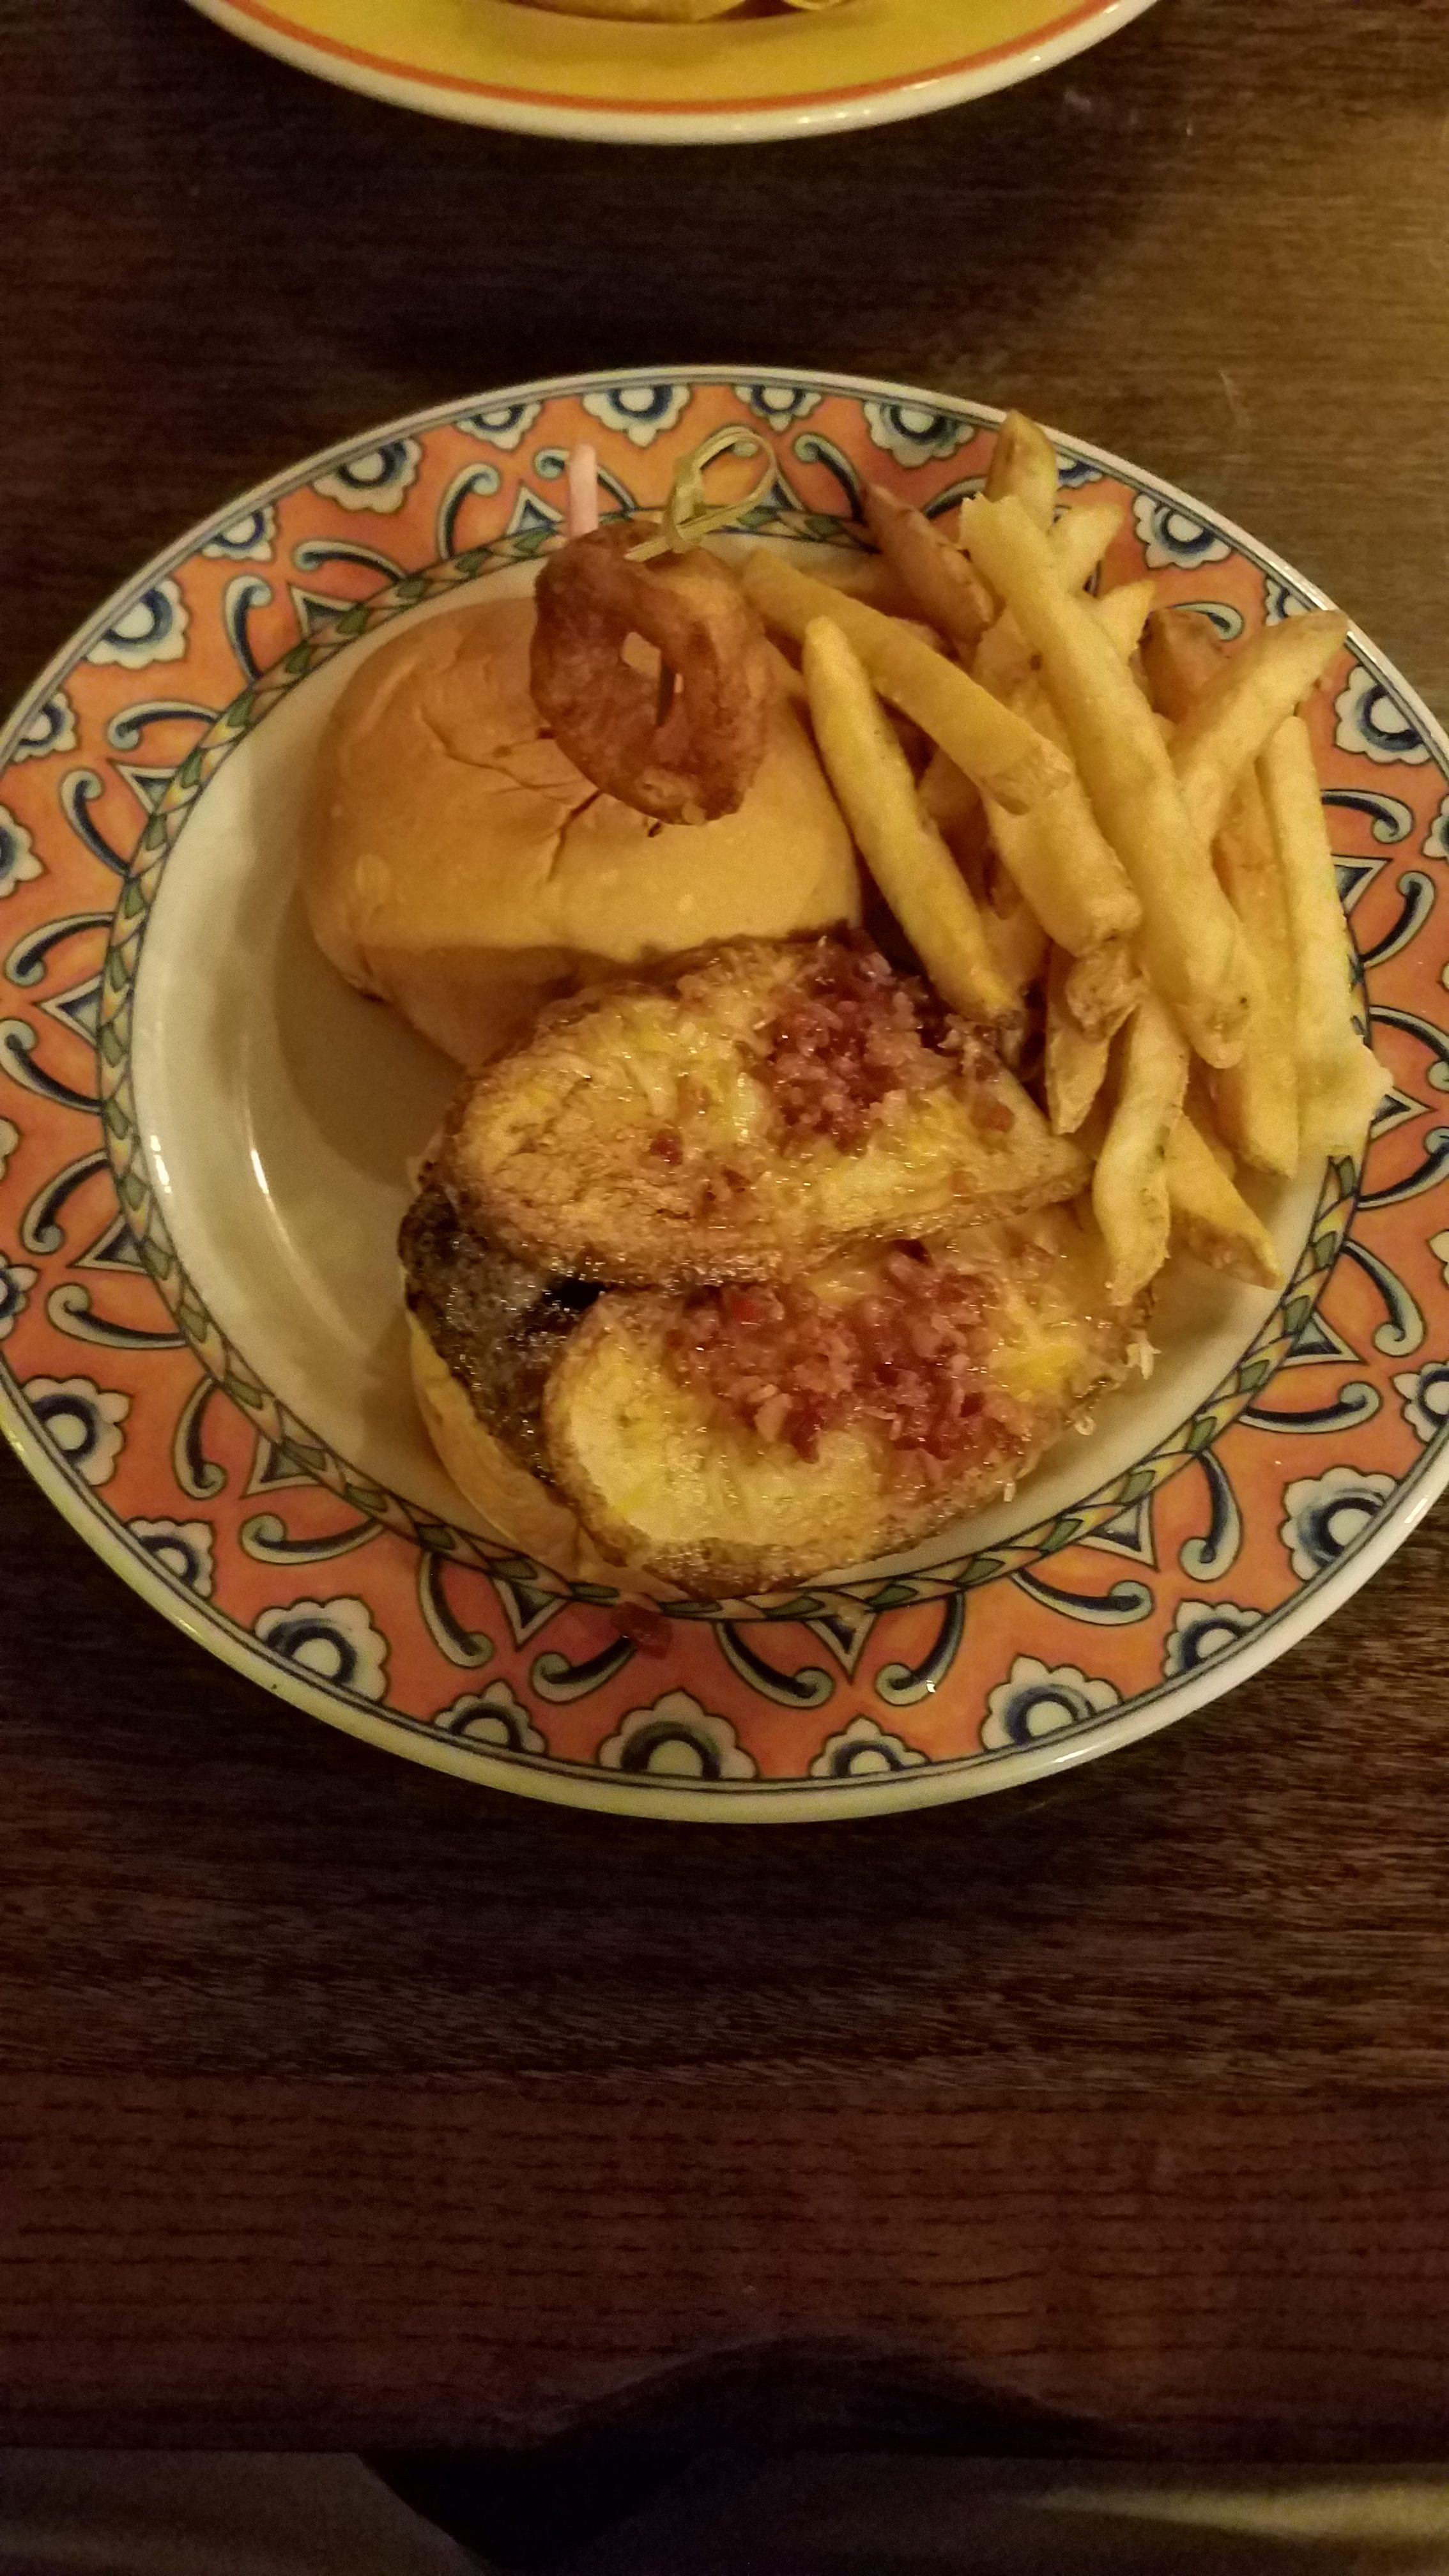 "Walk the Plank" Signature Burger at Confisco Grille - Dining Review - Islands of Adventure - Universal Orlando Resort - Unofficialuniversal.com